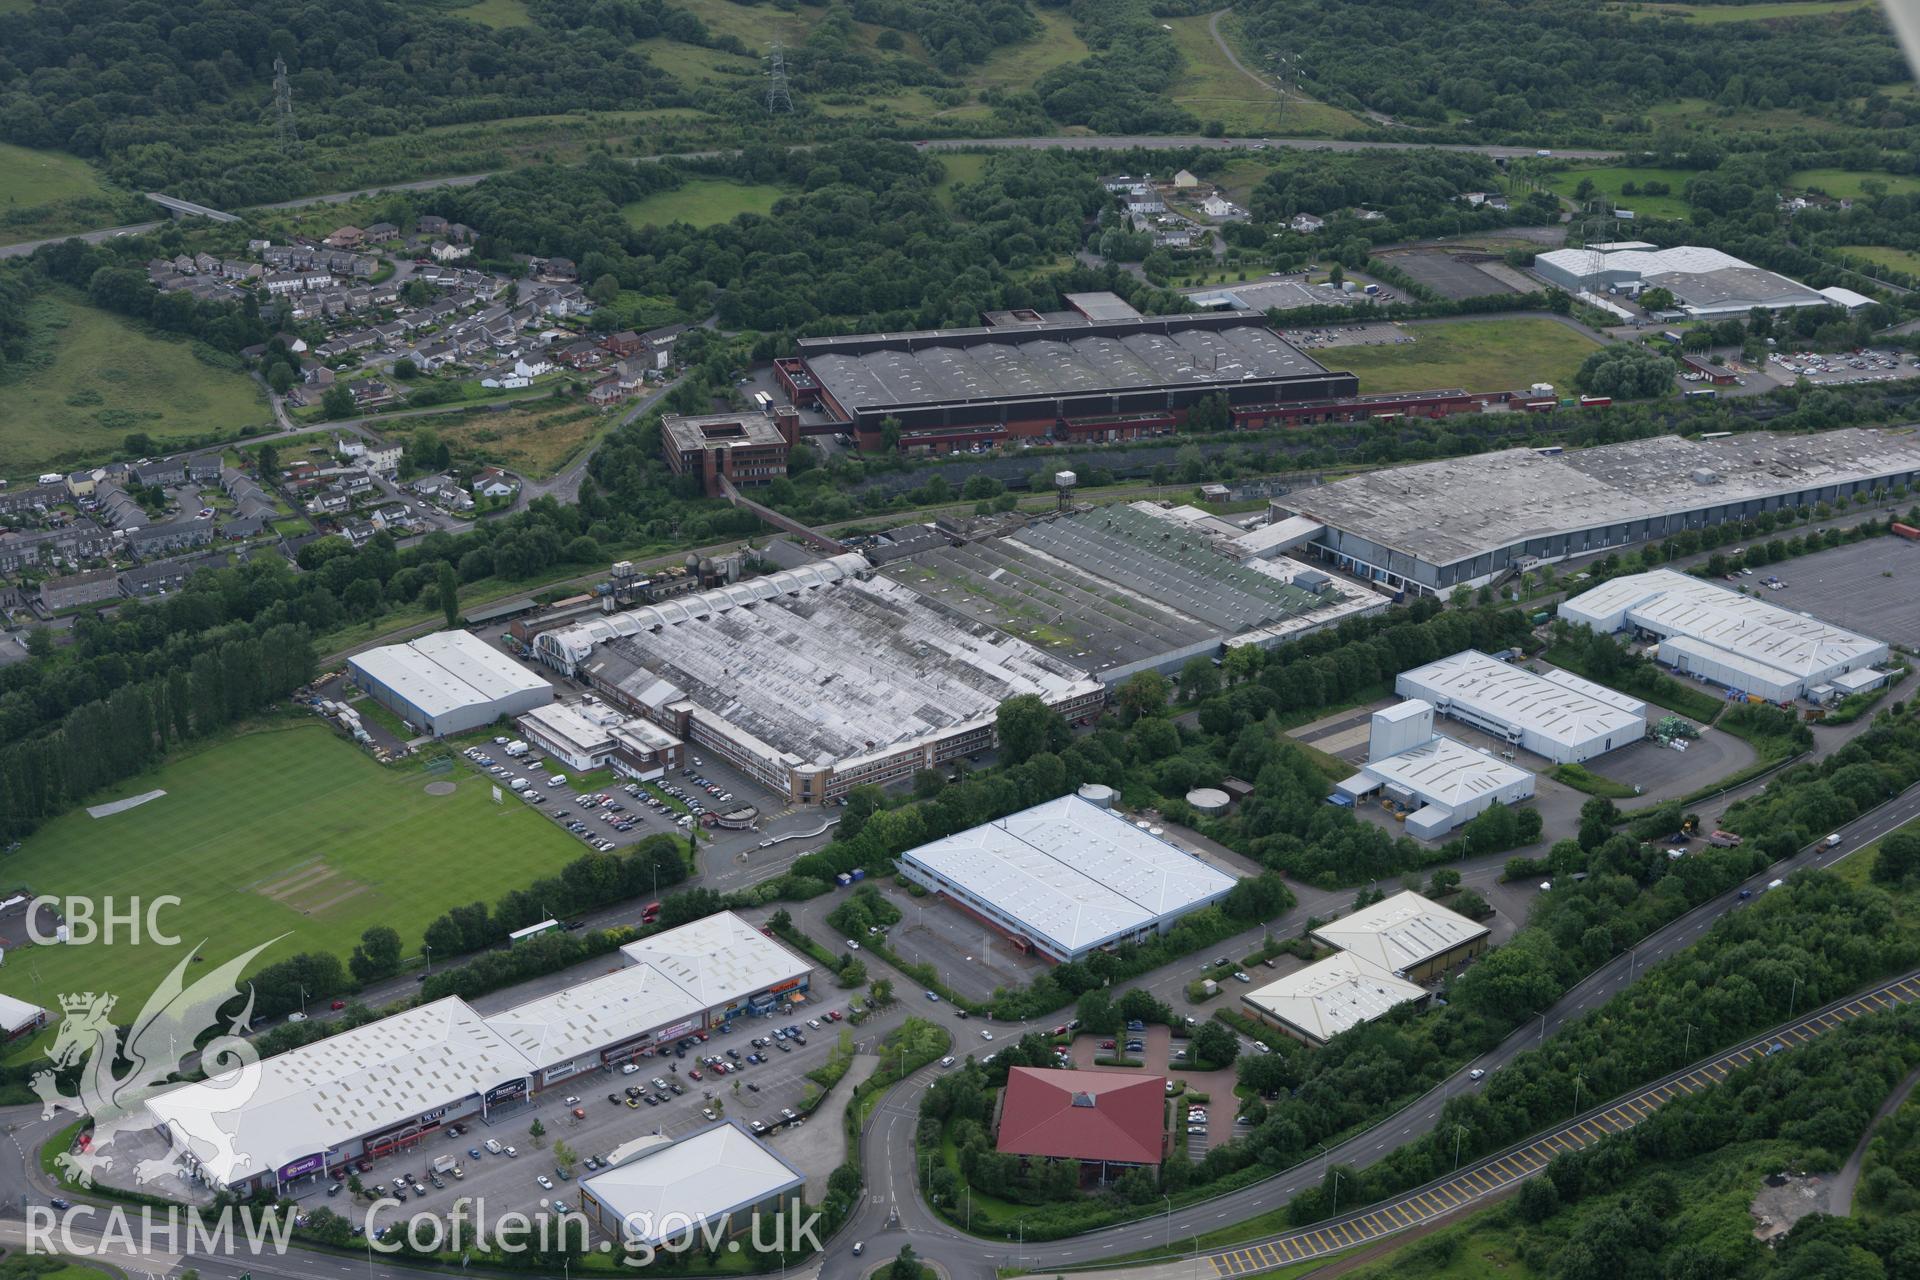 RCAHMW colour oblique aerial photograph of Hoover Factory, Merthyr Tydfil. Taken on 30 July 2007 by Toby Driver